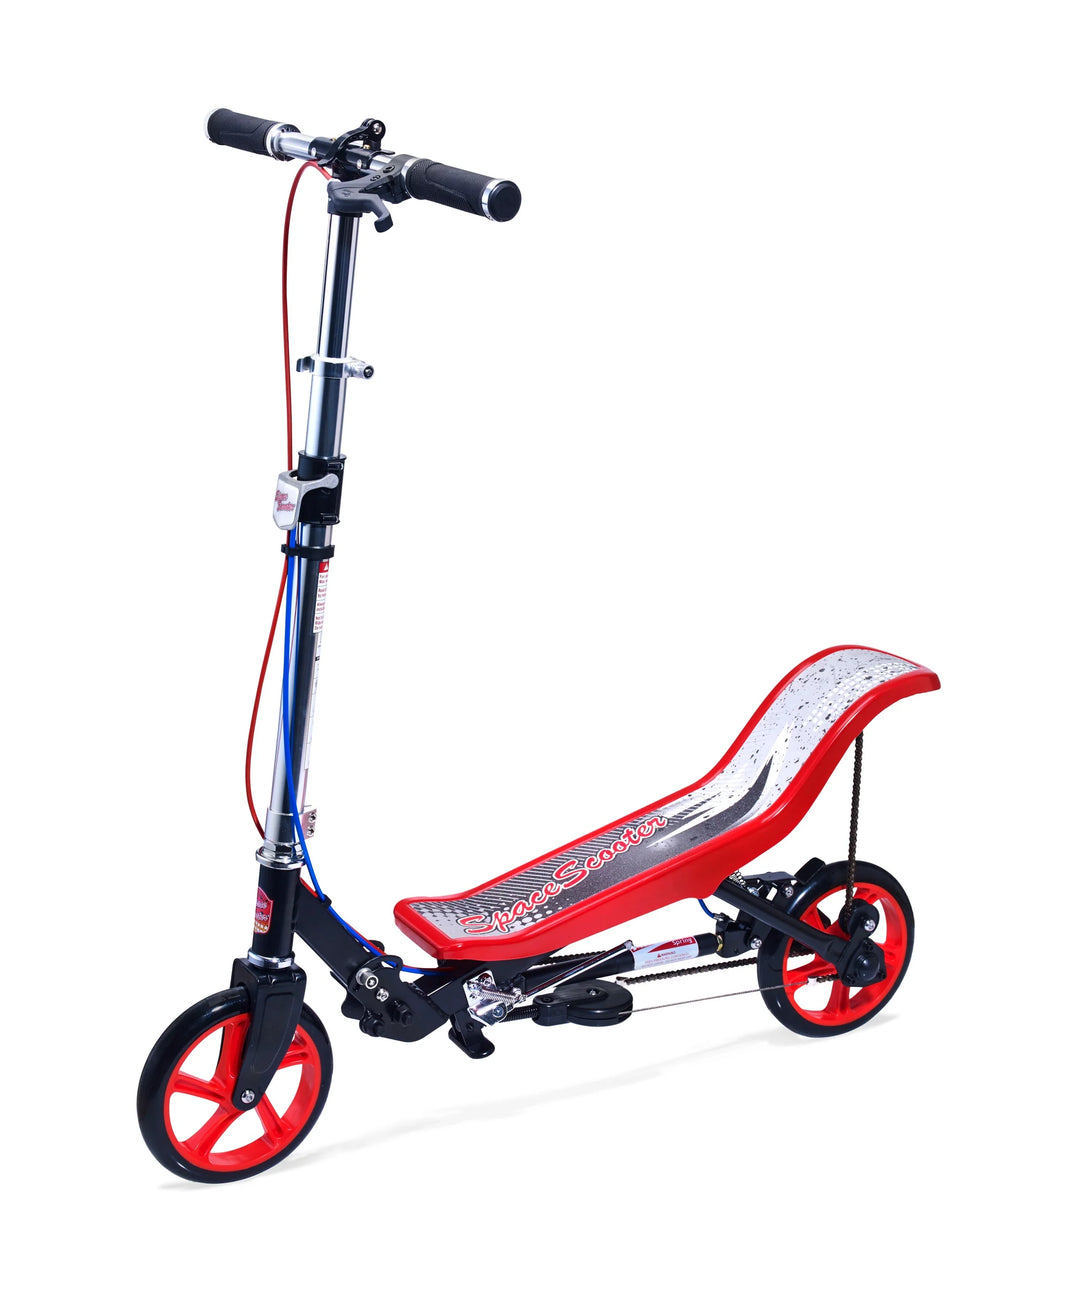 Space Scooter (X590) - Black/Red (REFSPBARE3)